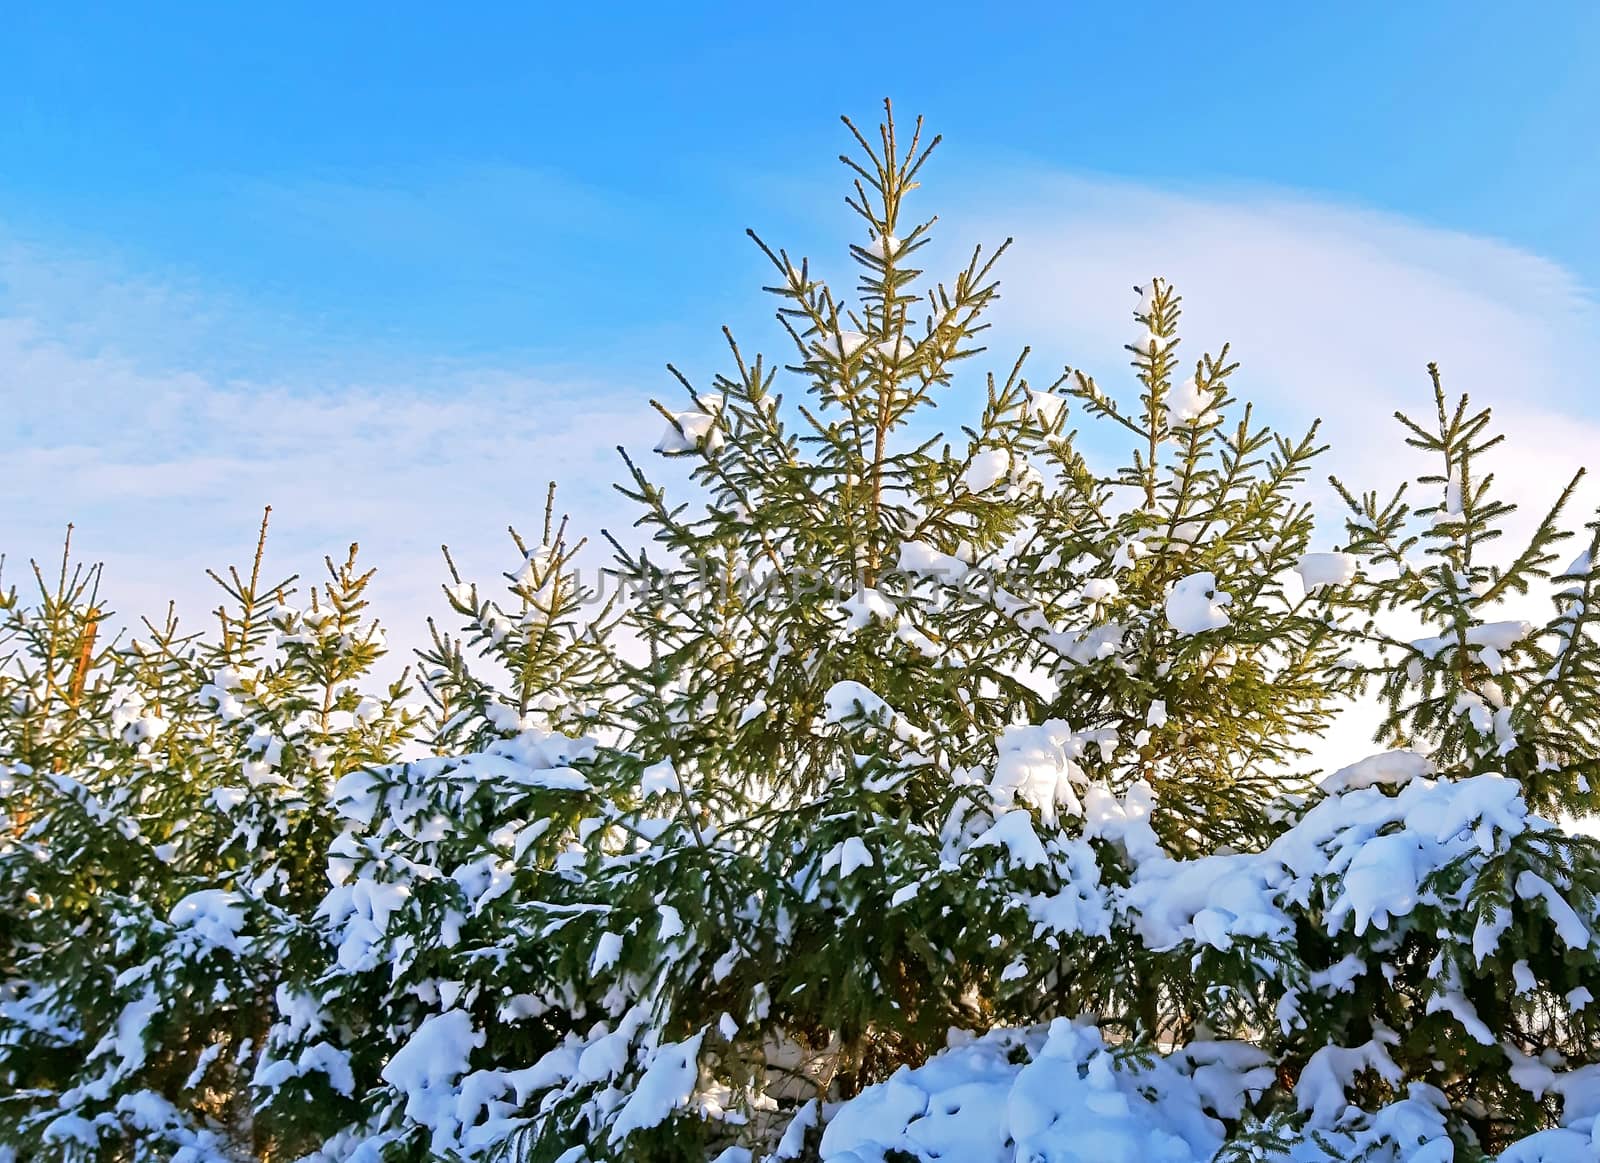 Fir trees in blue sky and with snow by Mindru